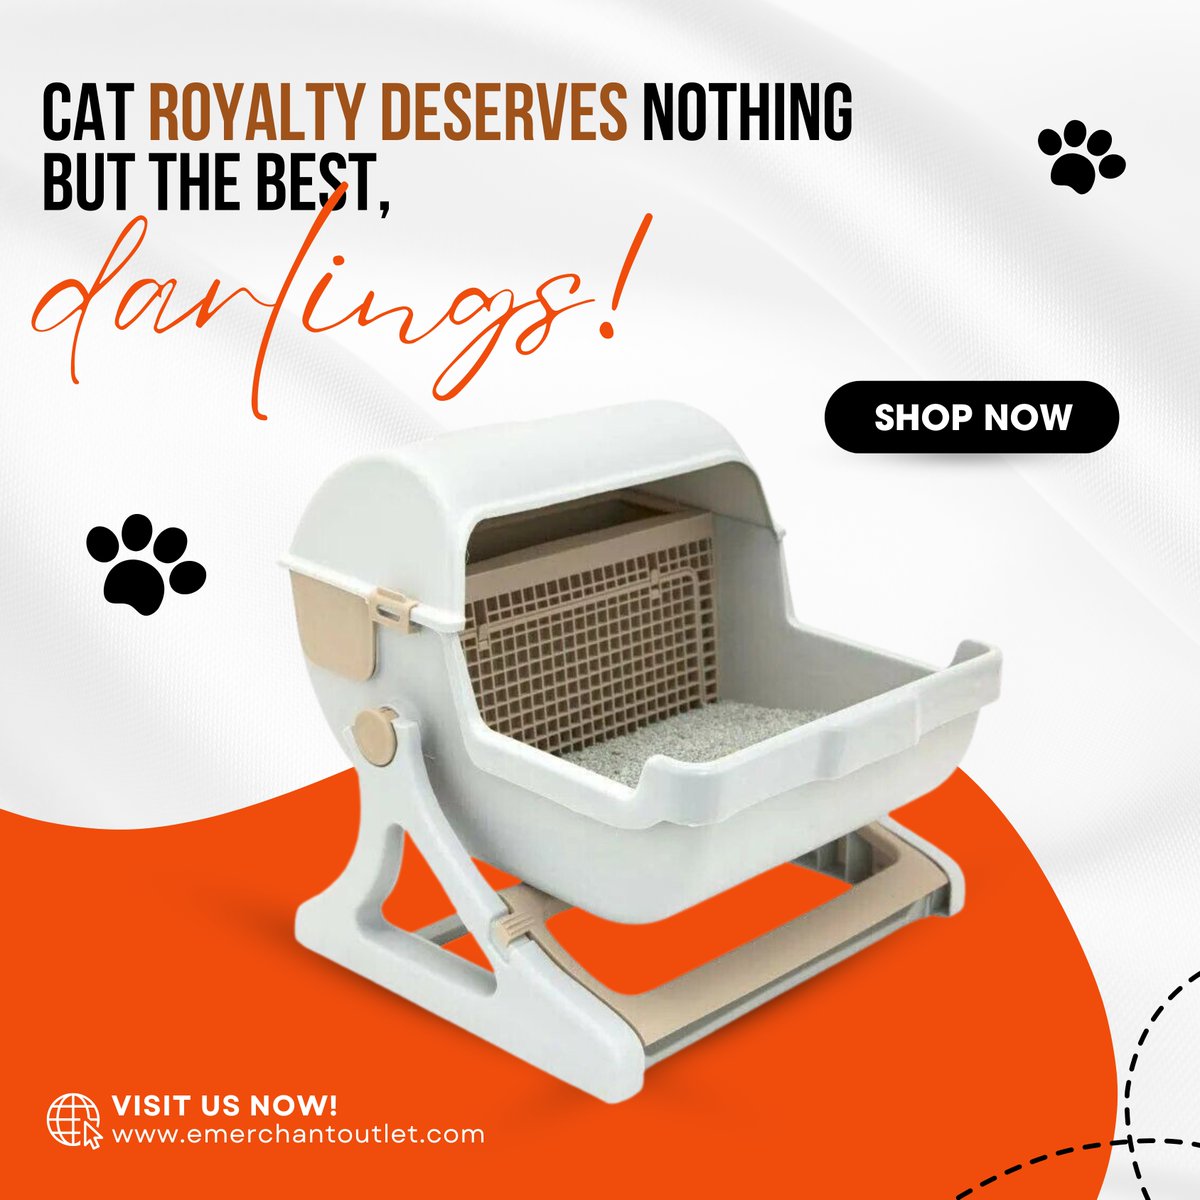 Presenting the Luxury Semi-Automatic Cat Litter Box – because why should humans have all the luxury? With a majestic 50% off, treat your feline friend to the lap of litter luxury without breaking the bank.

#luxurycatlitterbox #semiautomatic #catluxury #felinethrone